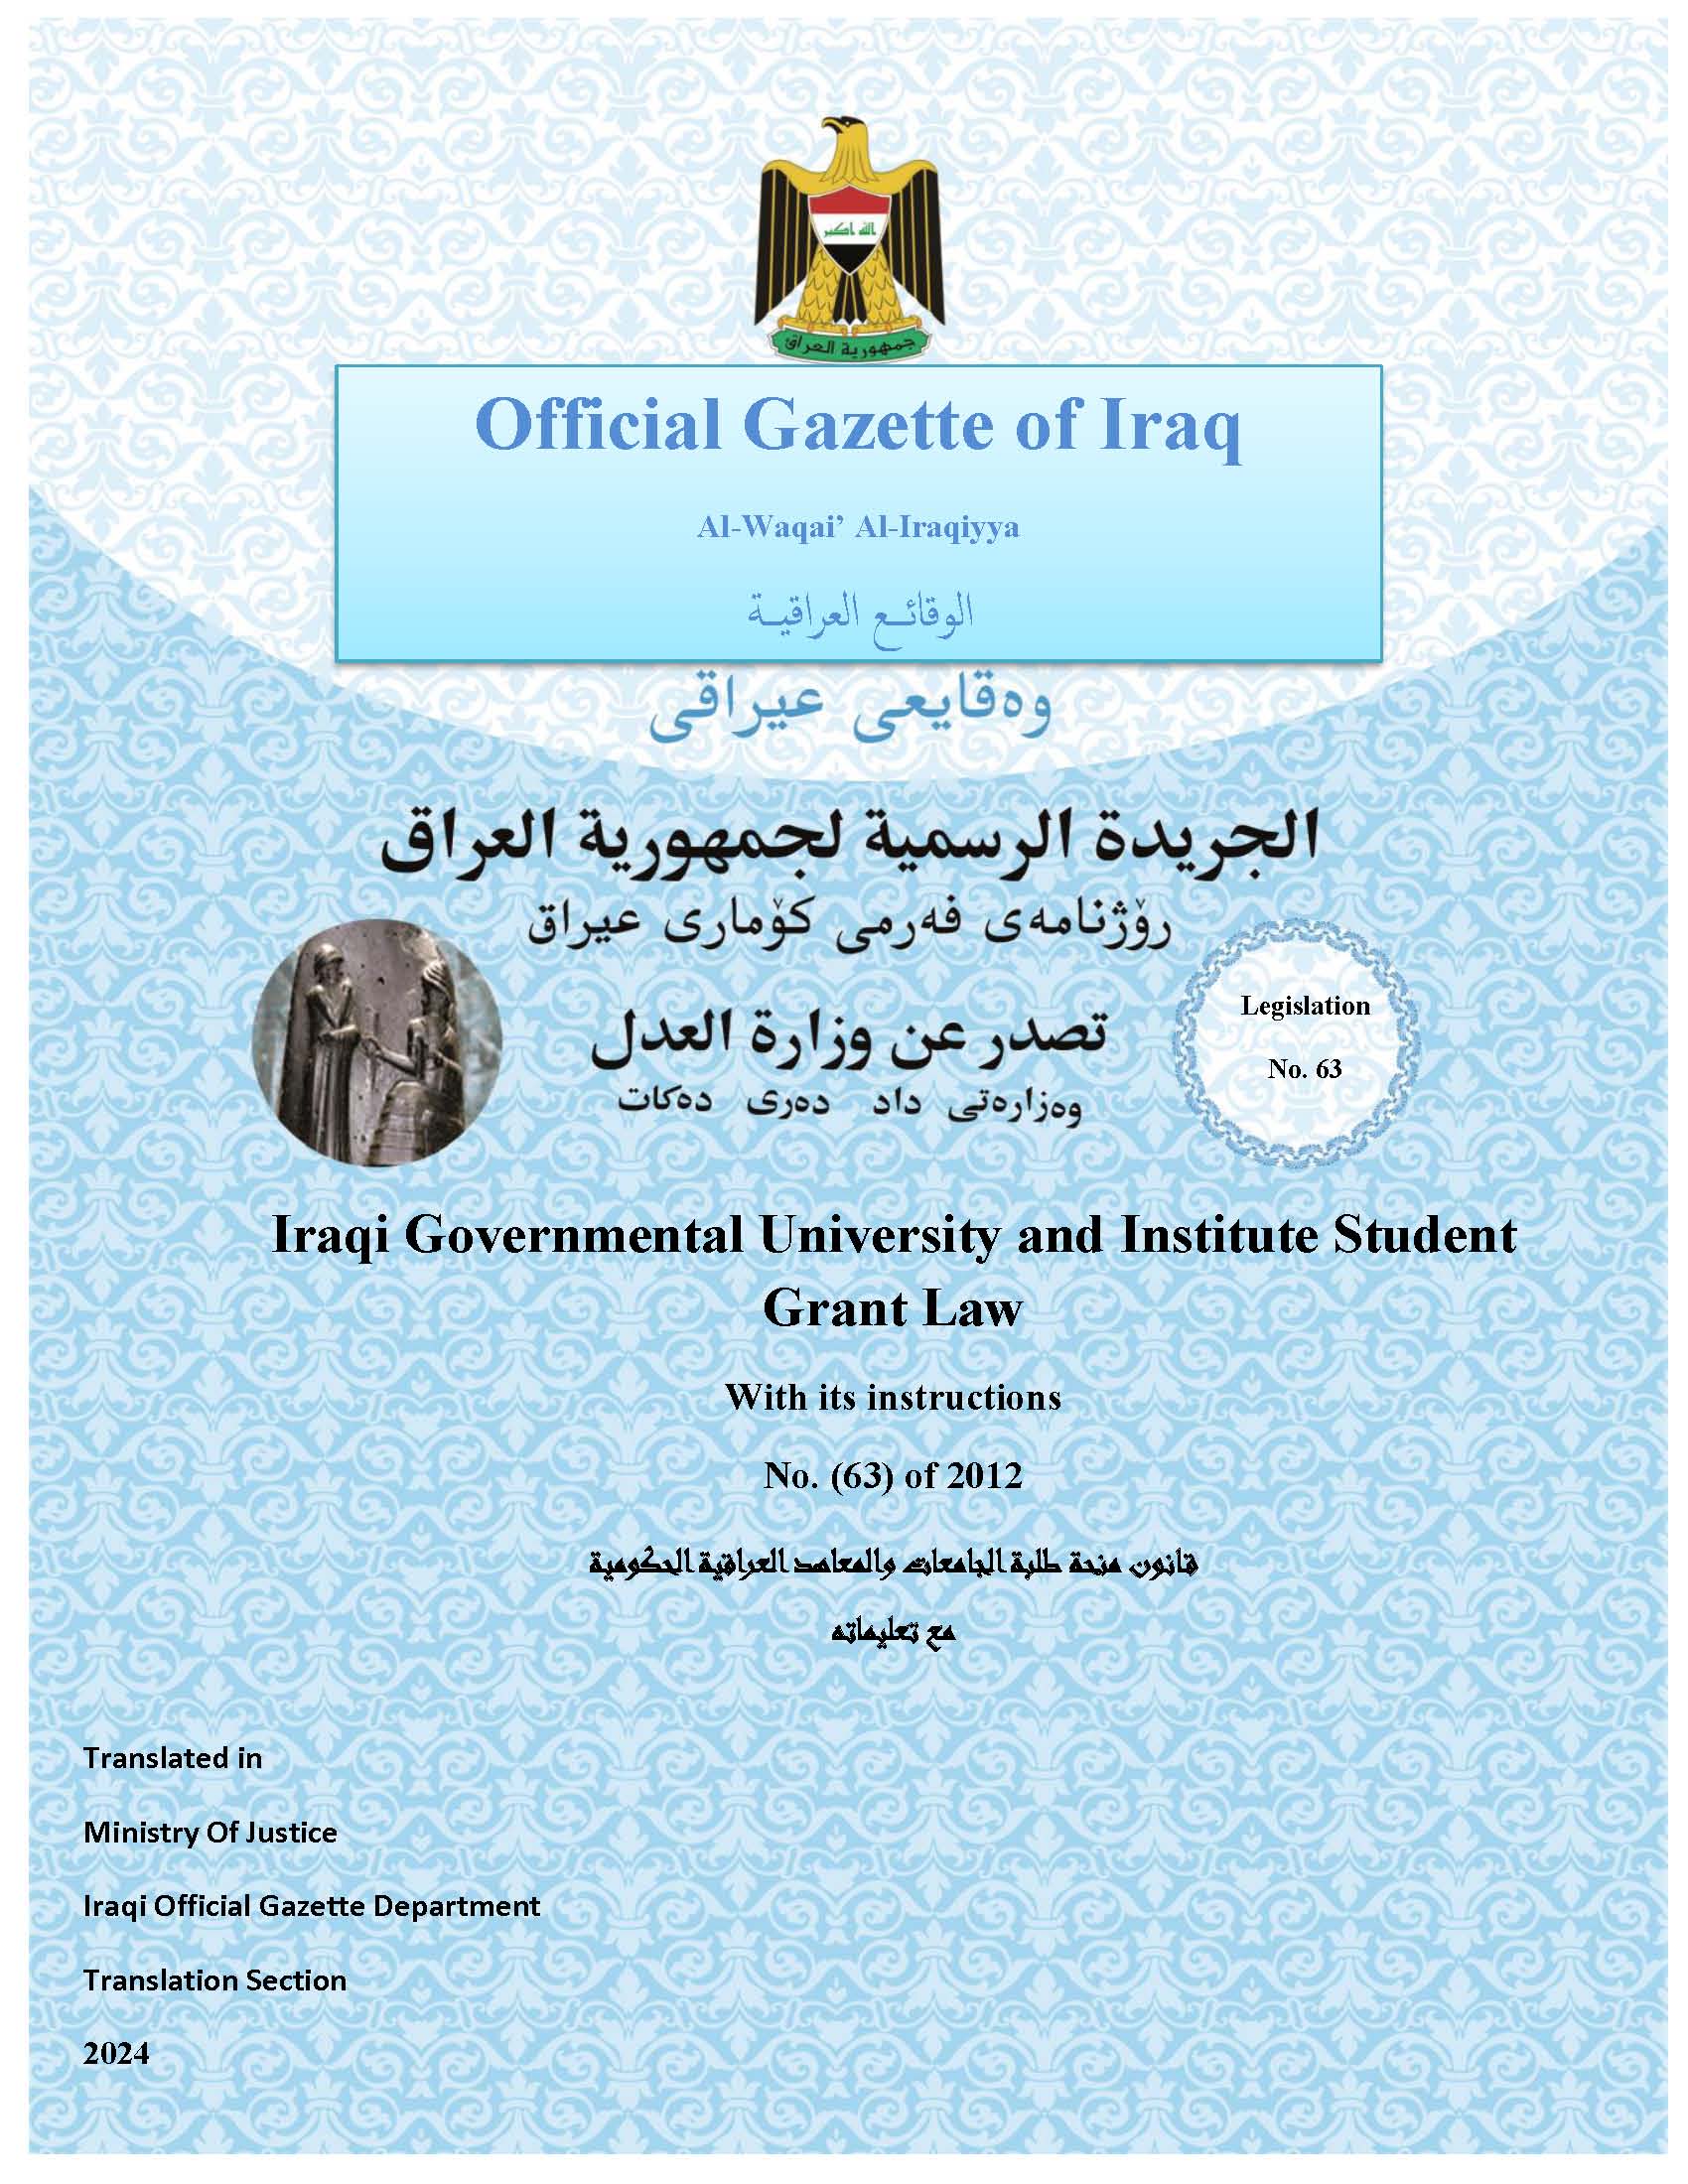 Iraqi Govermental University and Institute Syudent Grant Law With its instructions No.(63) of 2012